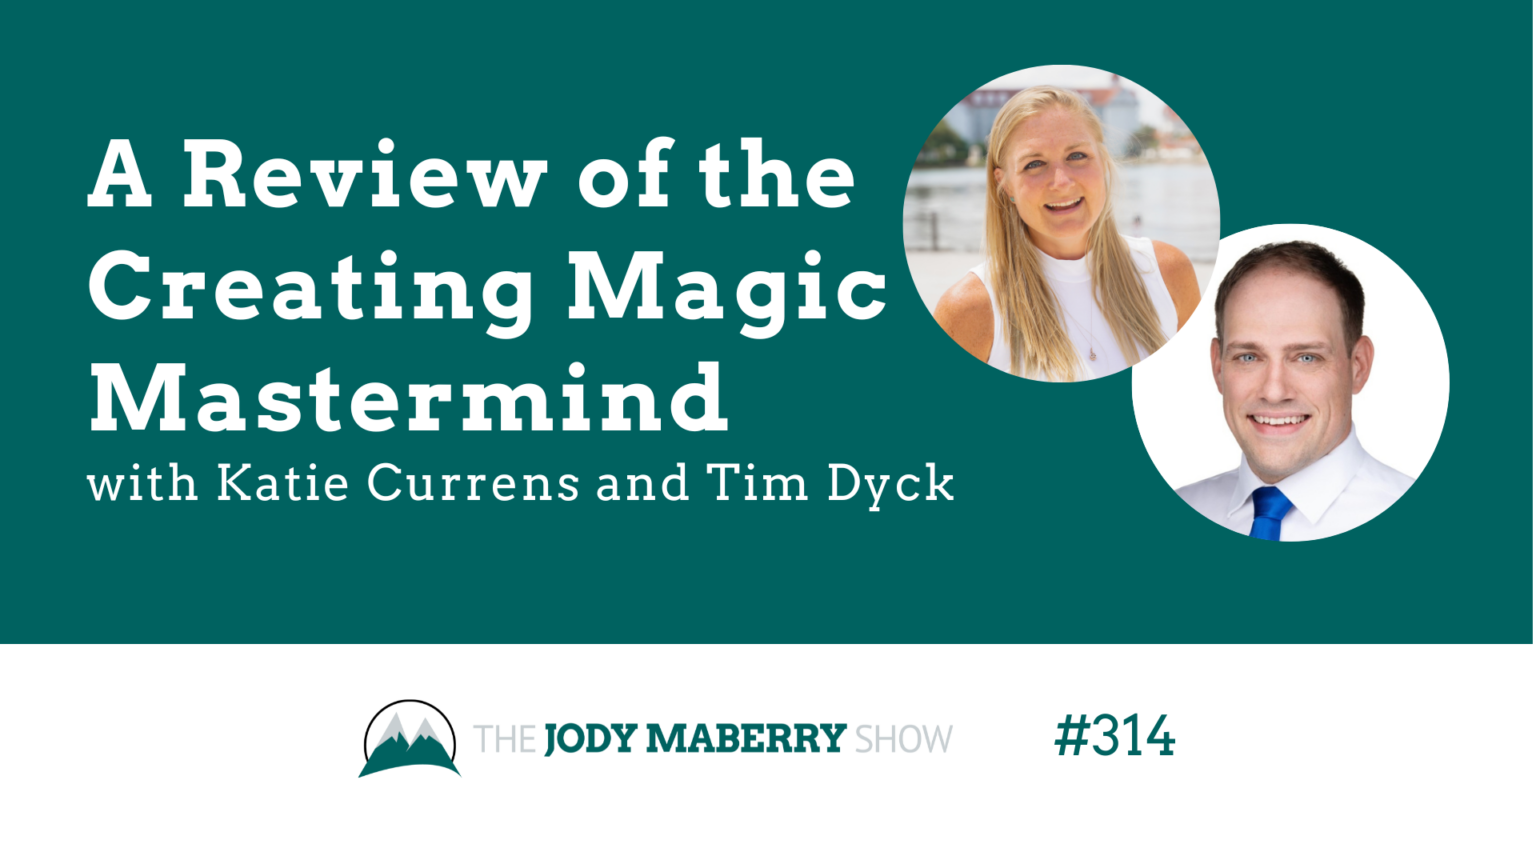 Jody Maberry Show Episode 314 A Review of the Creating Magic Mastermind